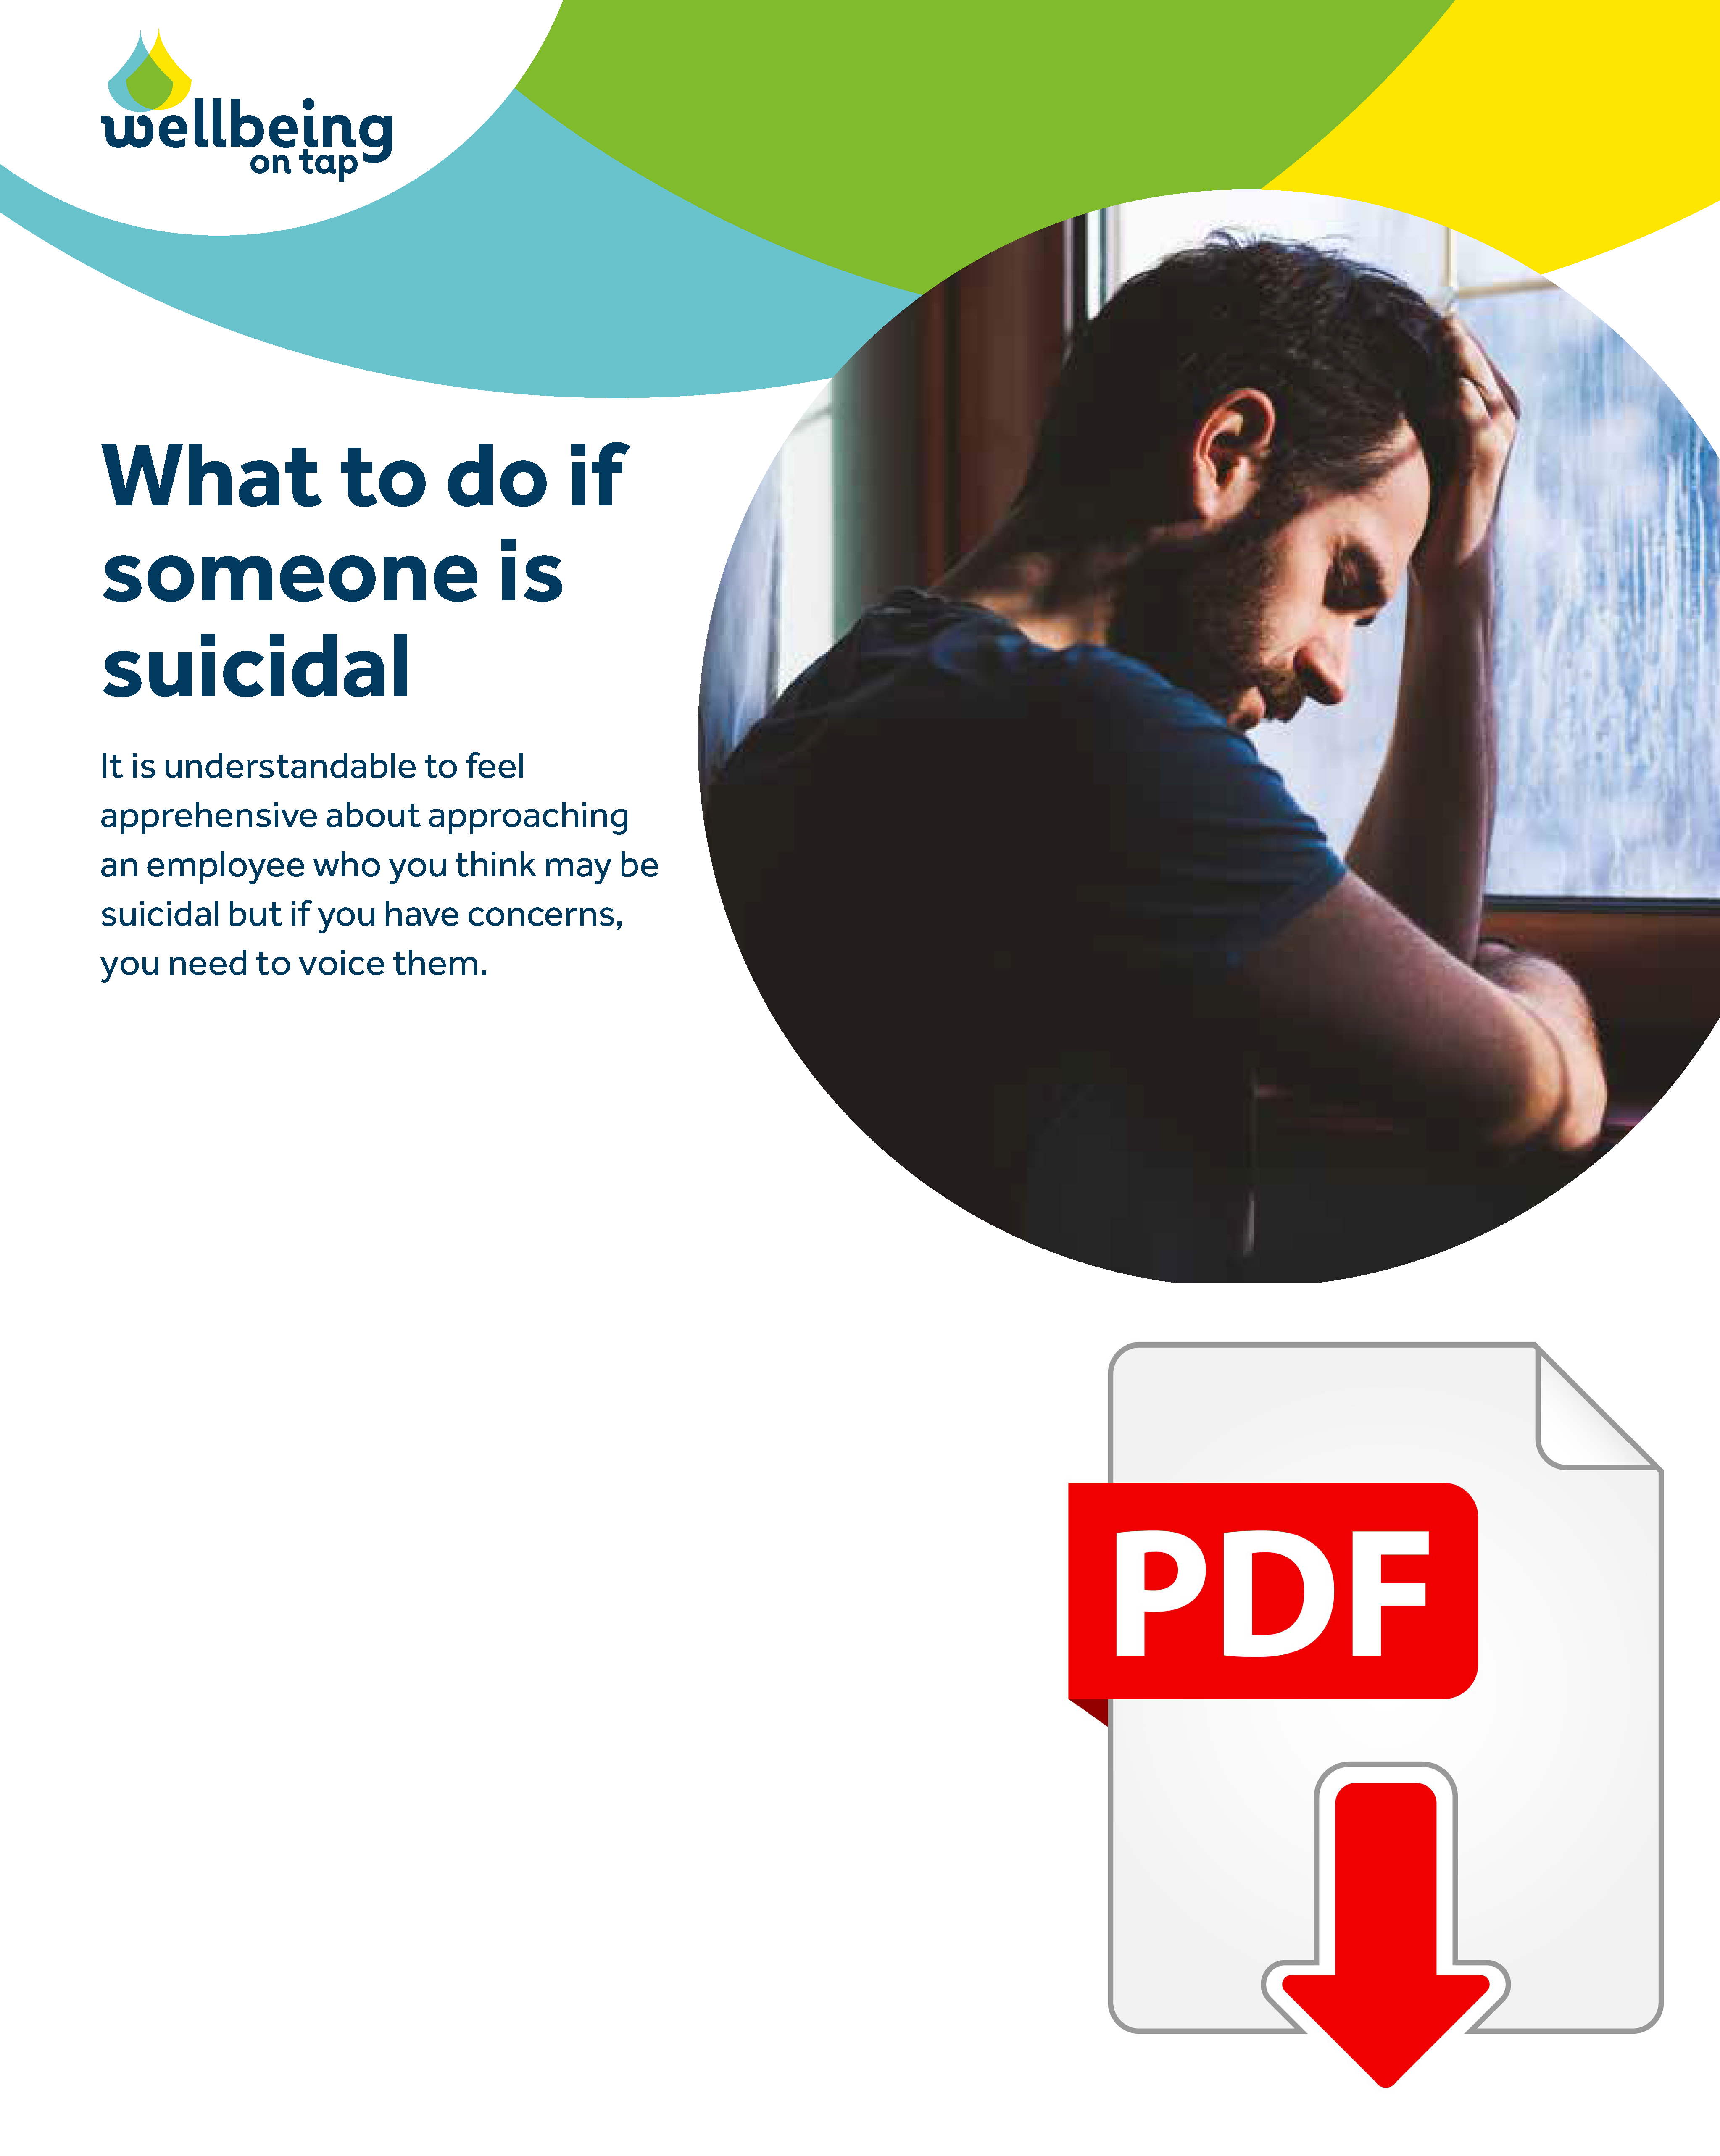 MP Wellbeing What to do when someone is suicidal